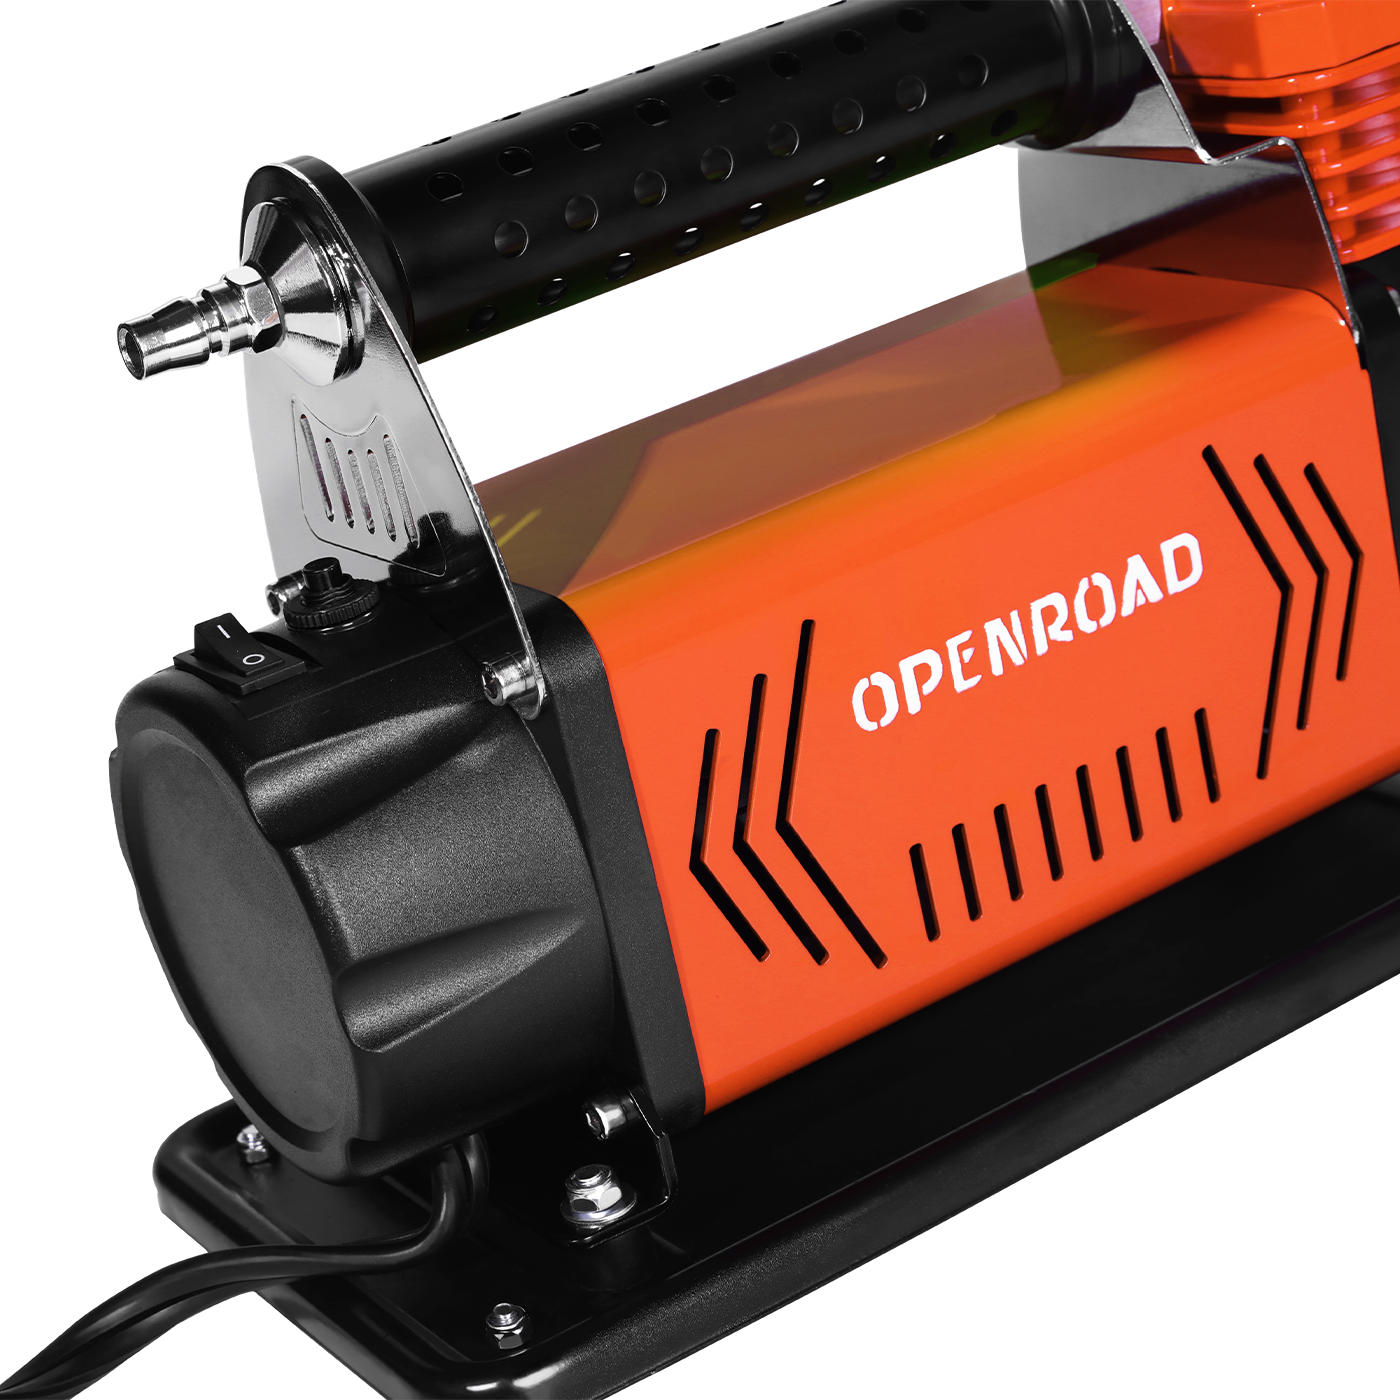 OPENROAD 12V Portable Inflator Air Compressor Heavy Duty, 5.65CFM Truck Tires Inflator, Offroad Air Compressor Kit for Car Tires 150PSI Air Compressor OPENROAD   